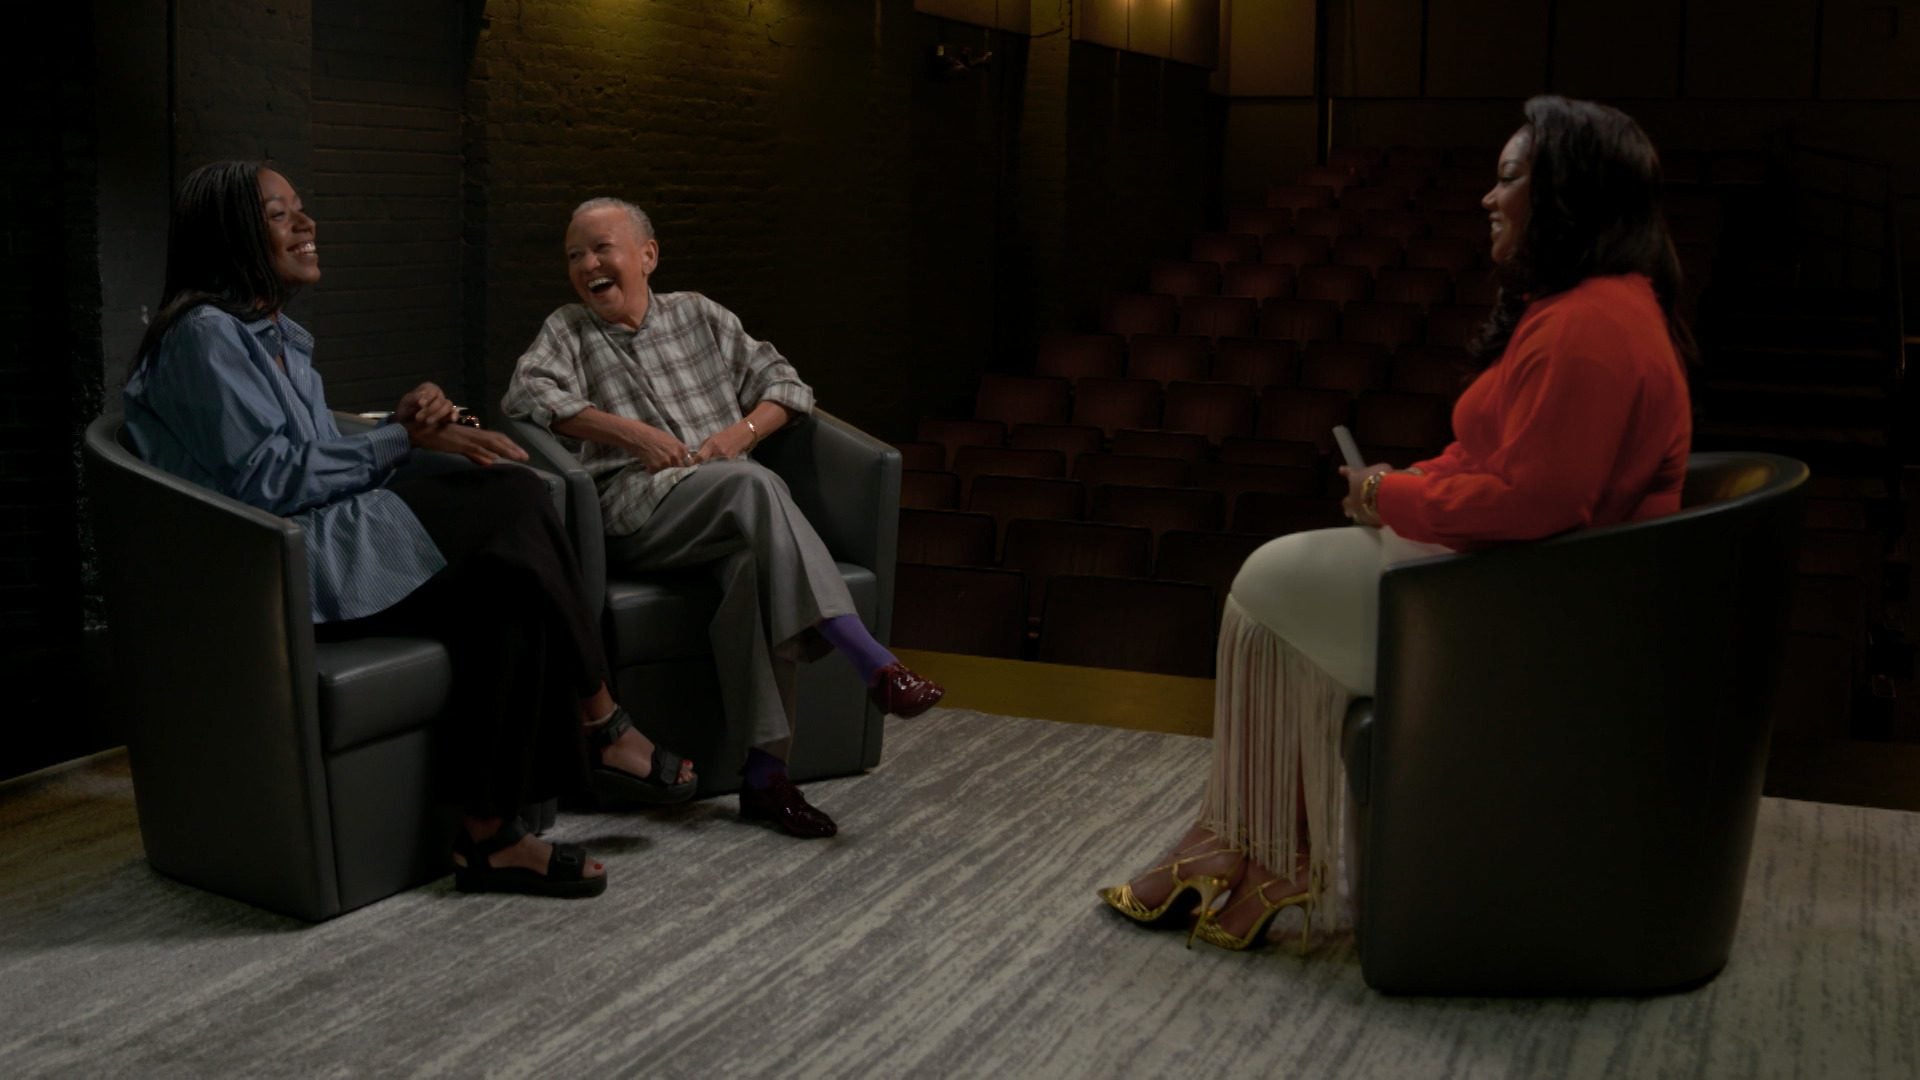 EXCLUSIVE: Nikki Giovanni Talks Love And Radicalism On New Conversation Show, 'Generational Anxiety'